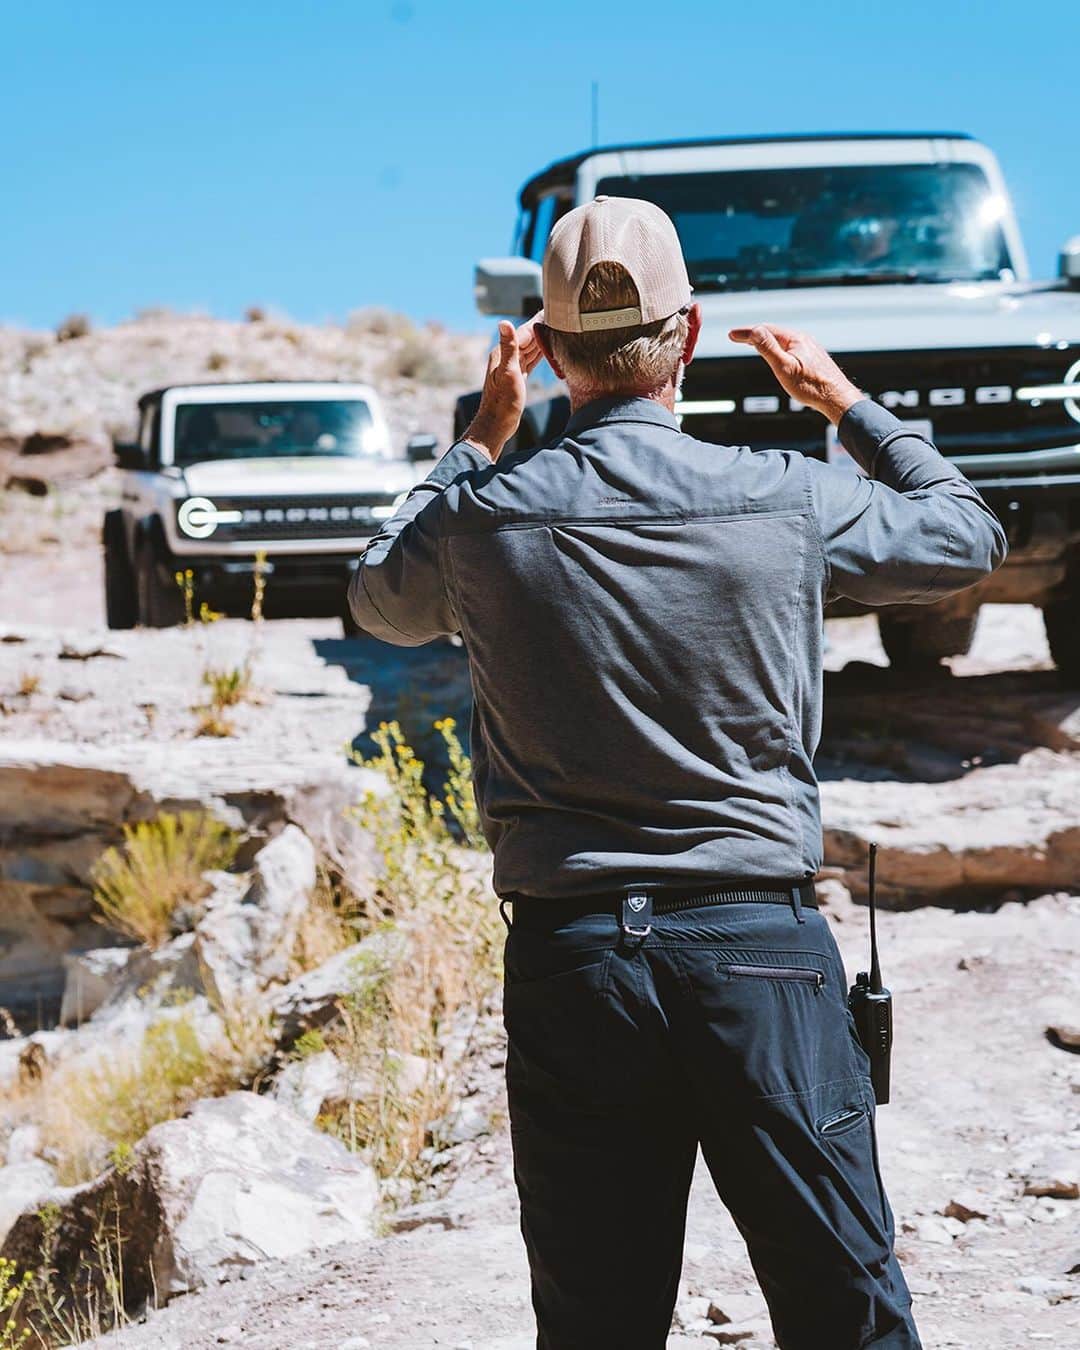 Fordのインスタグラム：「Our trail guides at Bronco Off-Roadeo show you how to get the most out of a Ford Bronco®. These off-road experts will demonstrate how to climb, crawl and cruise over the challenging, purpose-built trail specially designed to show off all a Bronco® can do.  Want to try it for yourself? Register now at our link in bio.  📷: @coldfear, @andrew__muse   Disclaimer: Previous model years shown. Optional equipment shown. Always consult the owner’s manual before off-road driving, know your terrain and trail difficulty, and use appropriate safety gear.」